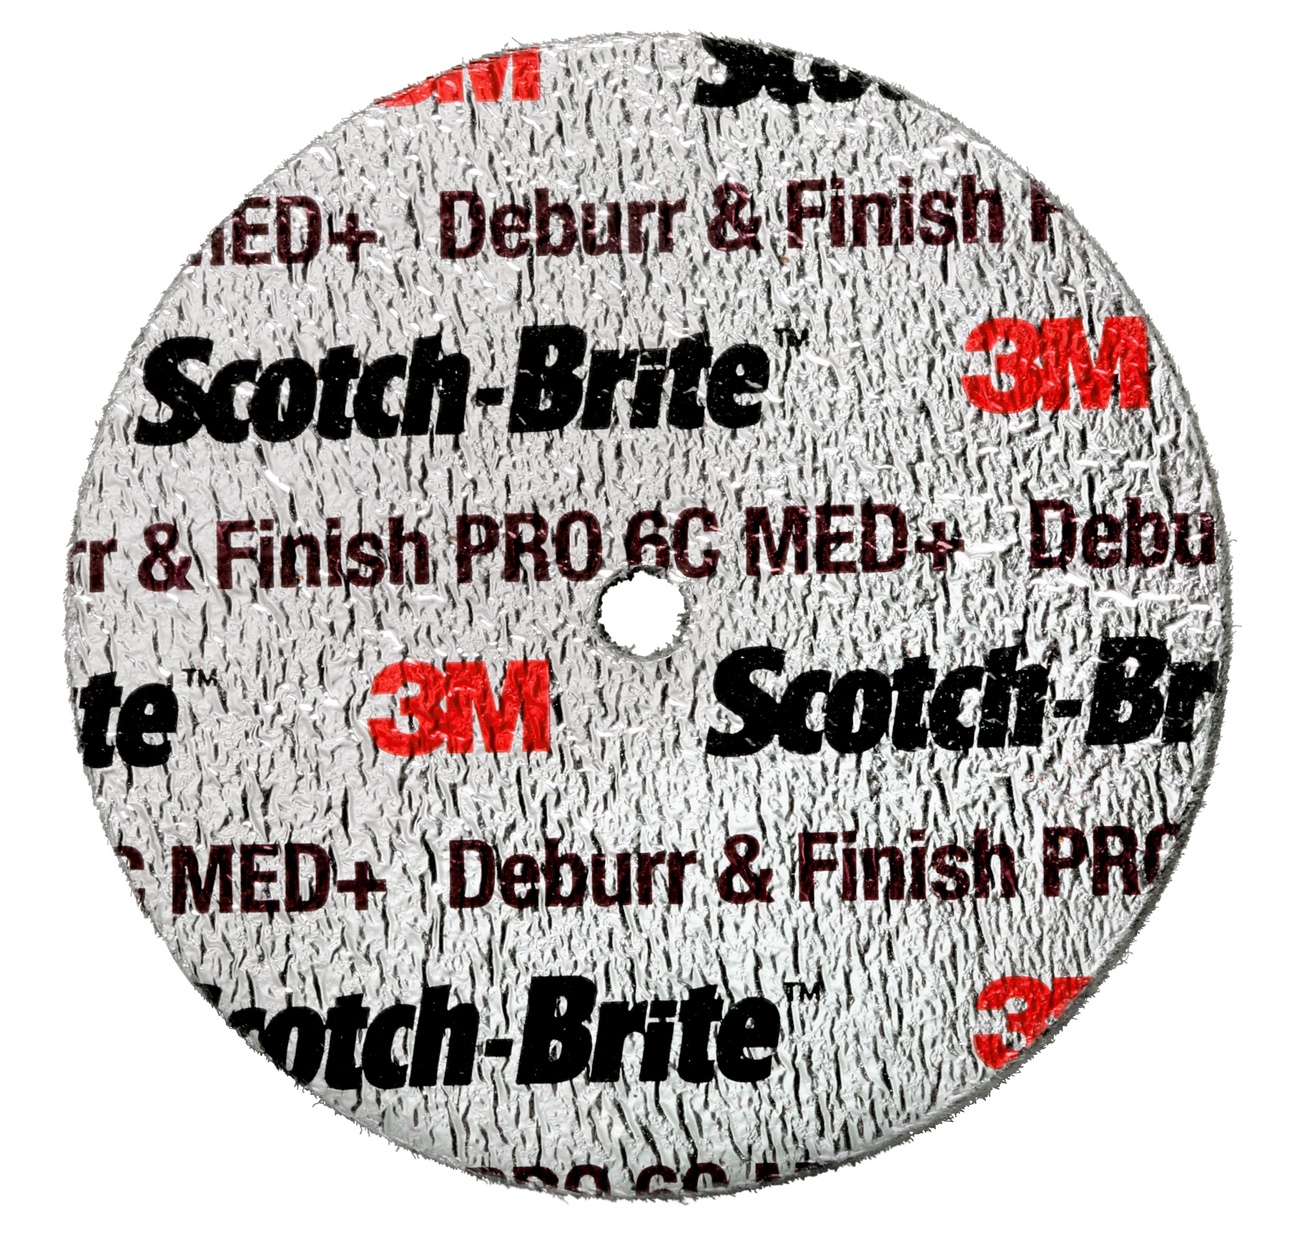 3M Scotch-Brite Deburr and Finish PRO compact disc DP-UW, 152 mm x 3.2 mm x 12.7 mm, 6C MED+